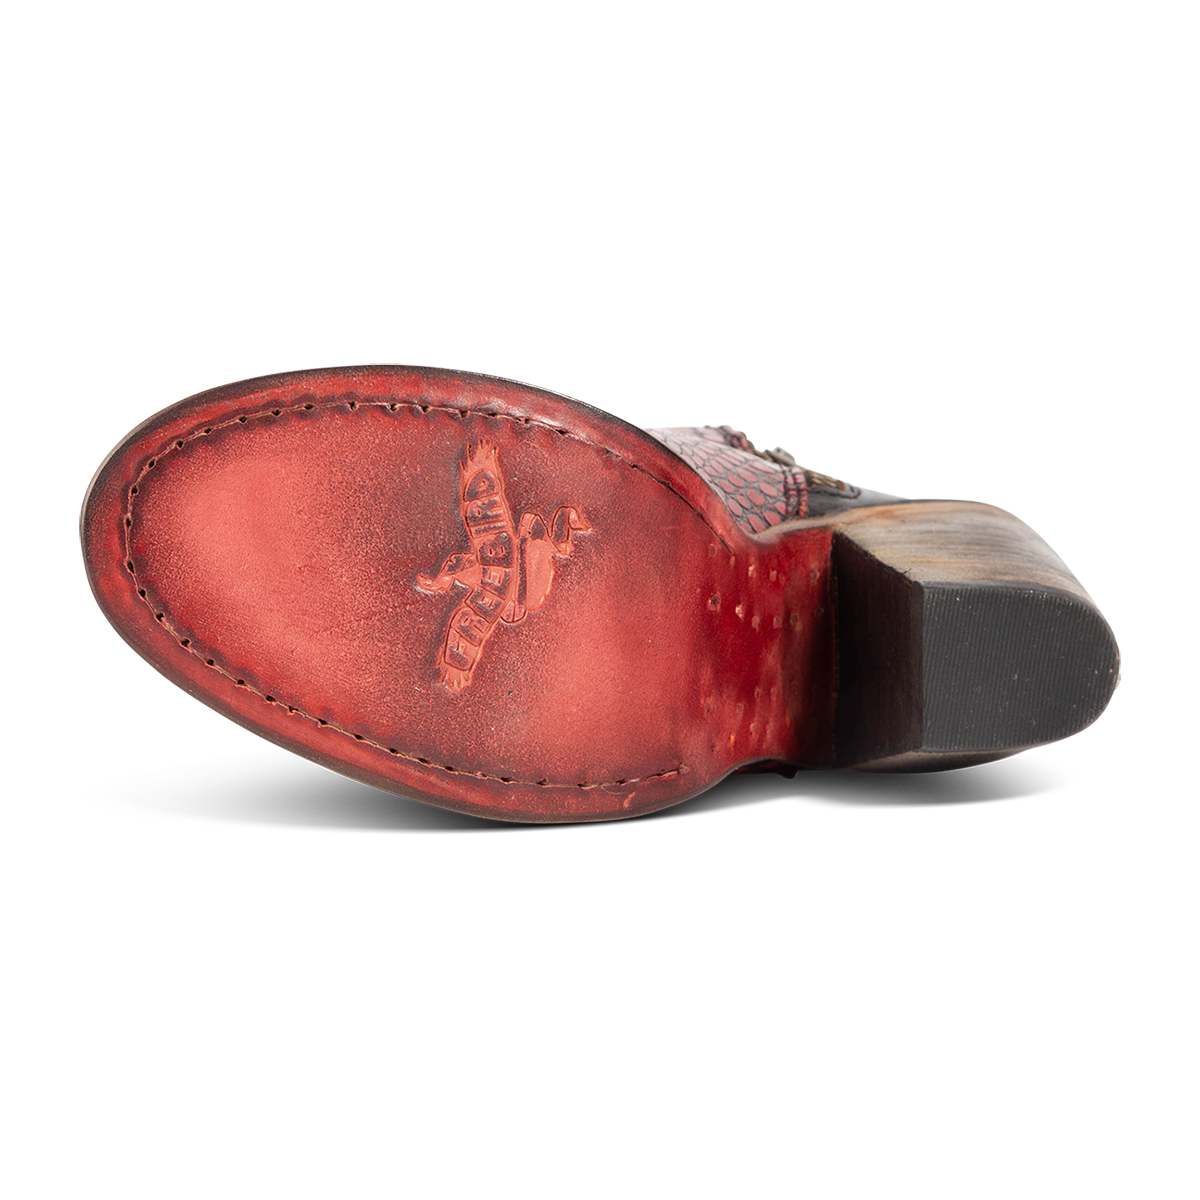 Leather sole imprinted with FREEBIRD on women's Detroit red croco bootie